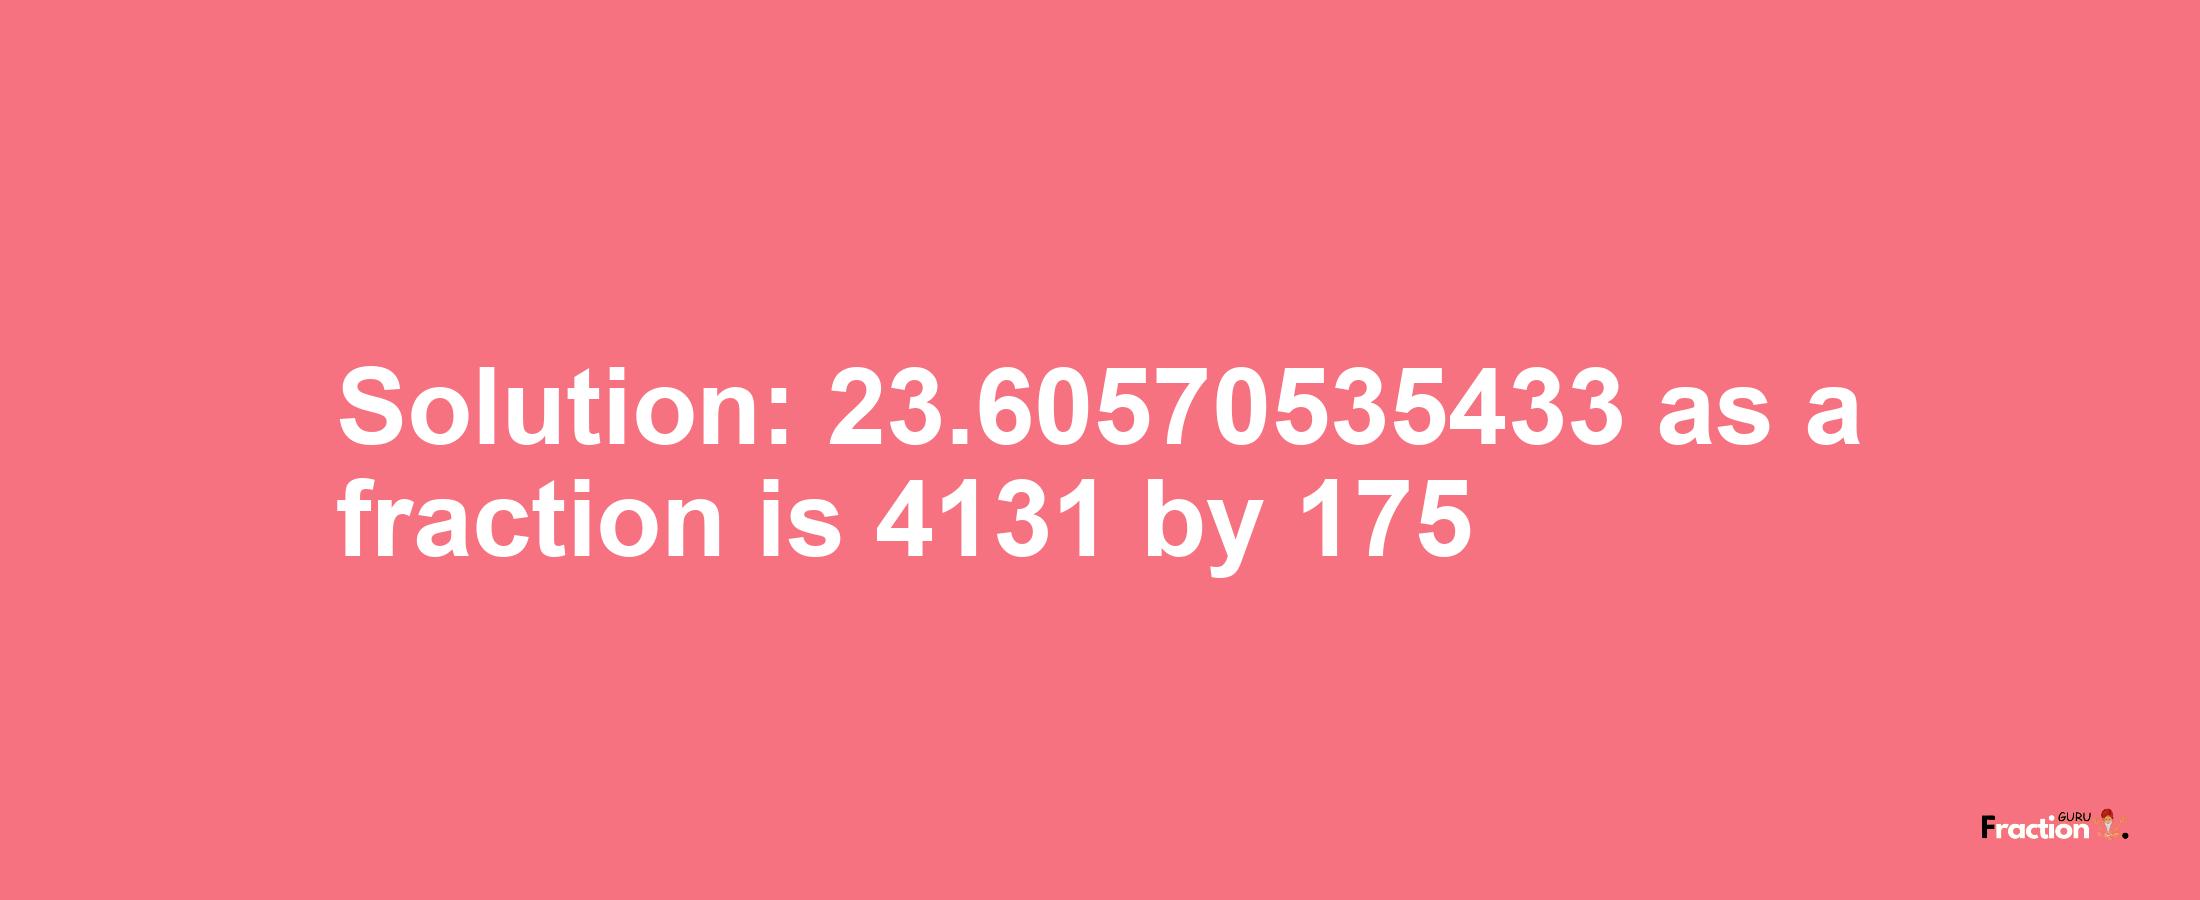 Solution:23.60570535433 as a fraction is 4131/175